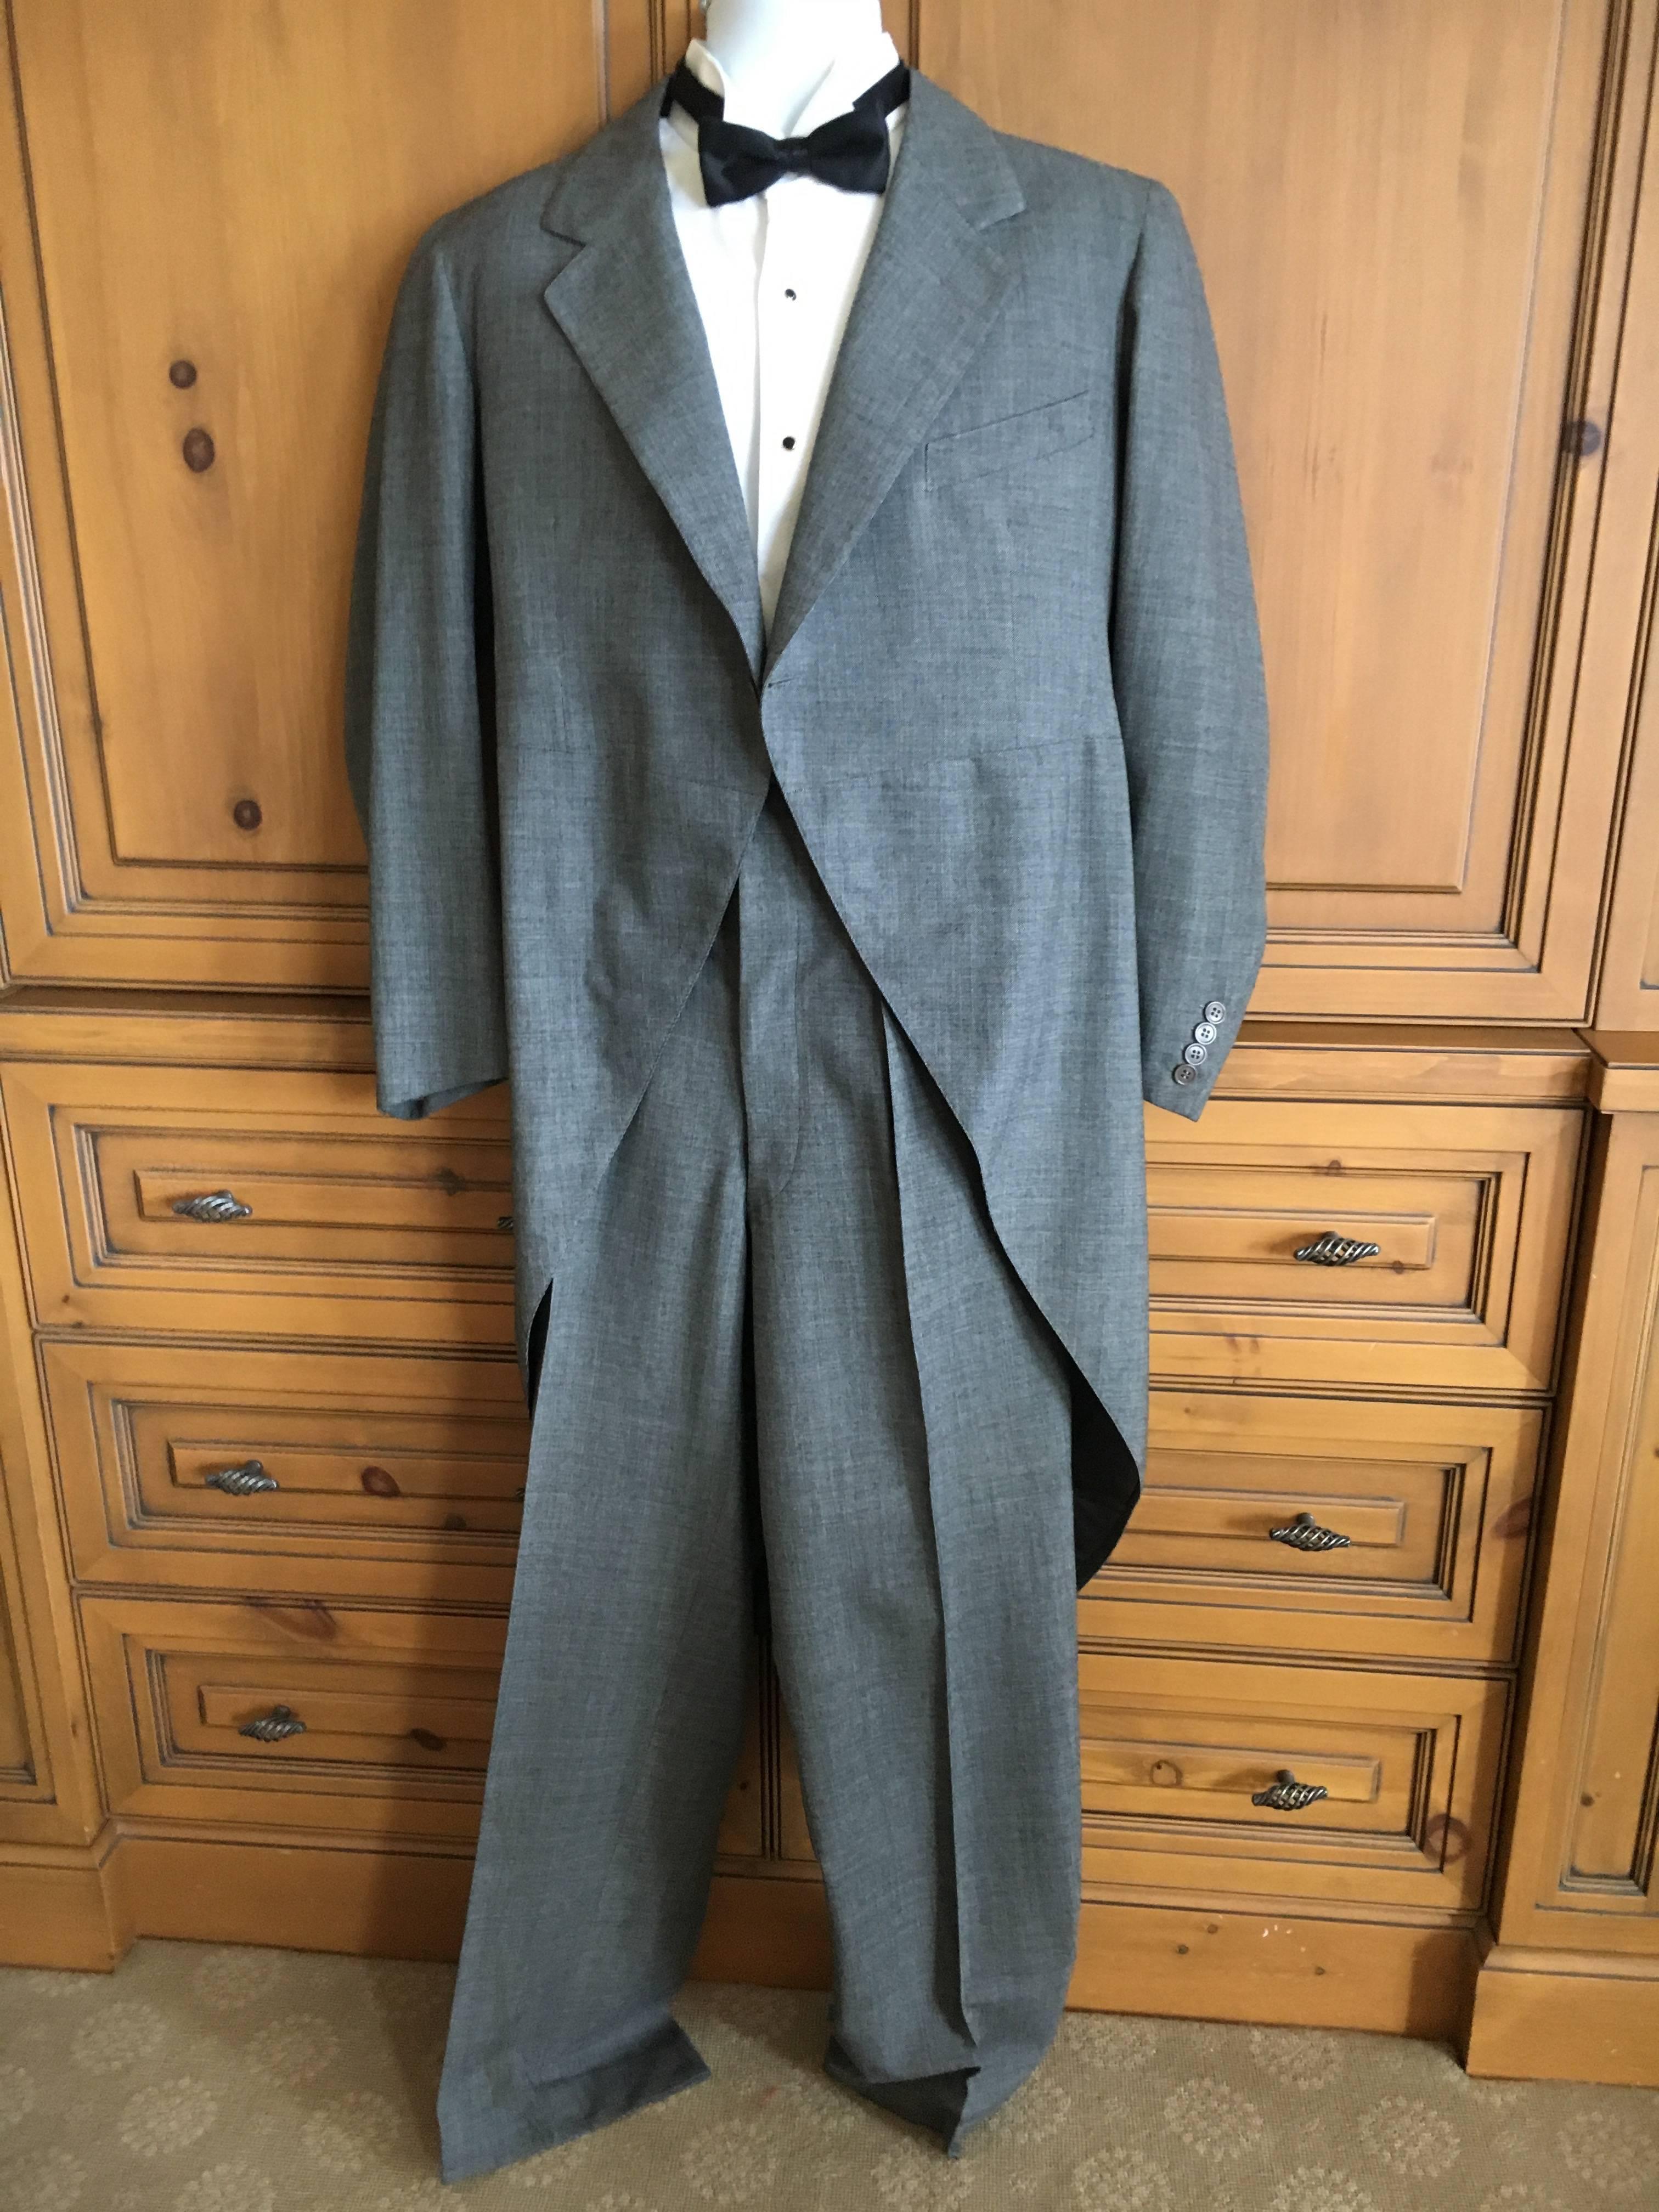 Wonderful summer weight light gray wool formal suit from F.L. Dunne & Co.
F.L. Dunne & Co. was a society tailor in NY and Boston, discreetly tailoring suiting and formal wear for  high society for almost century.
The owner was a polo playing count,